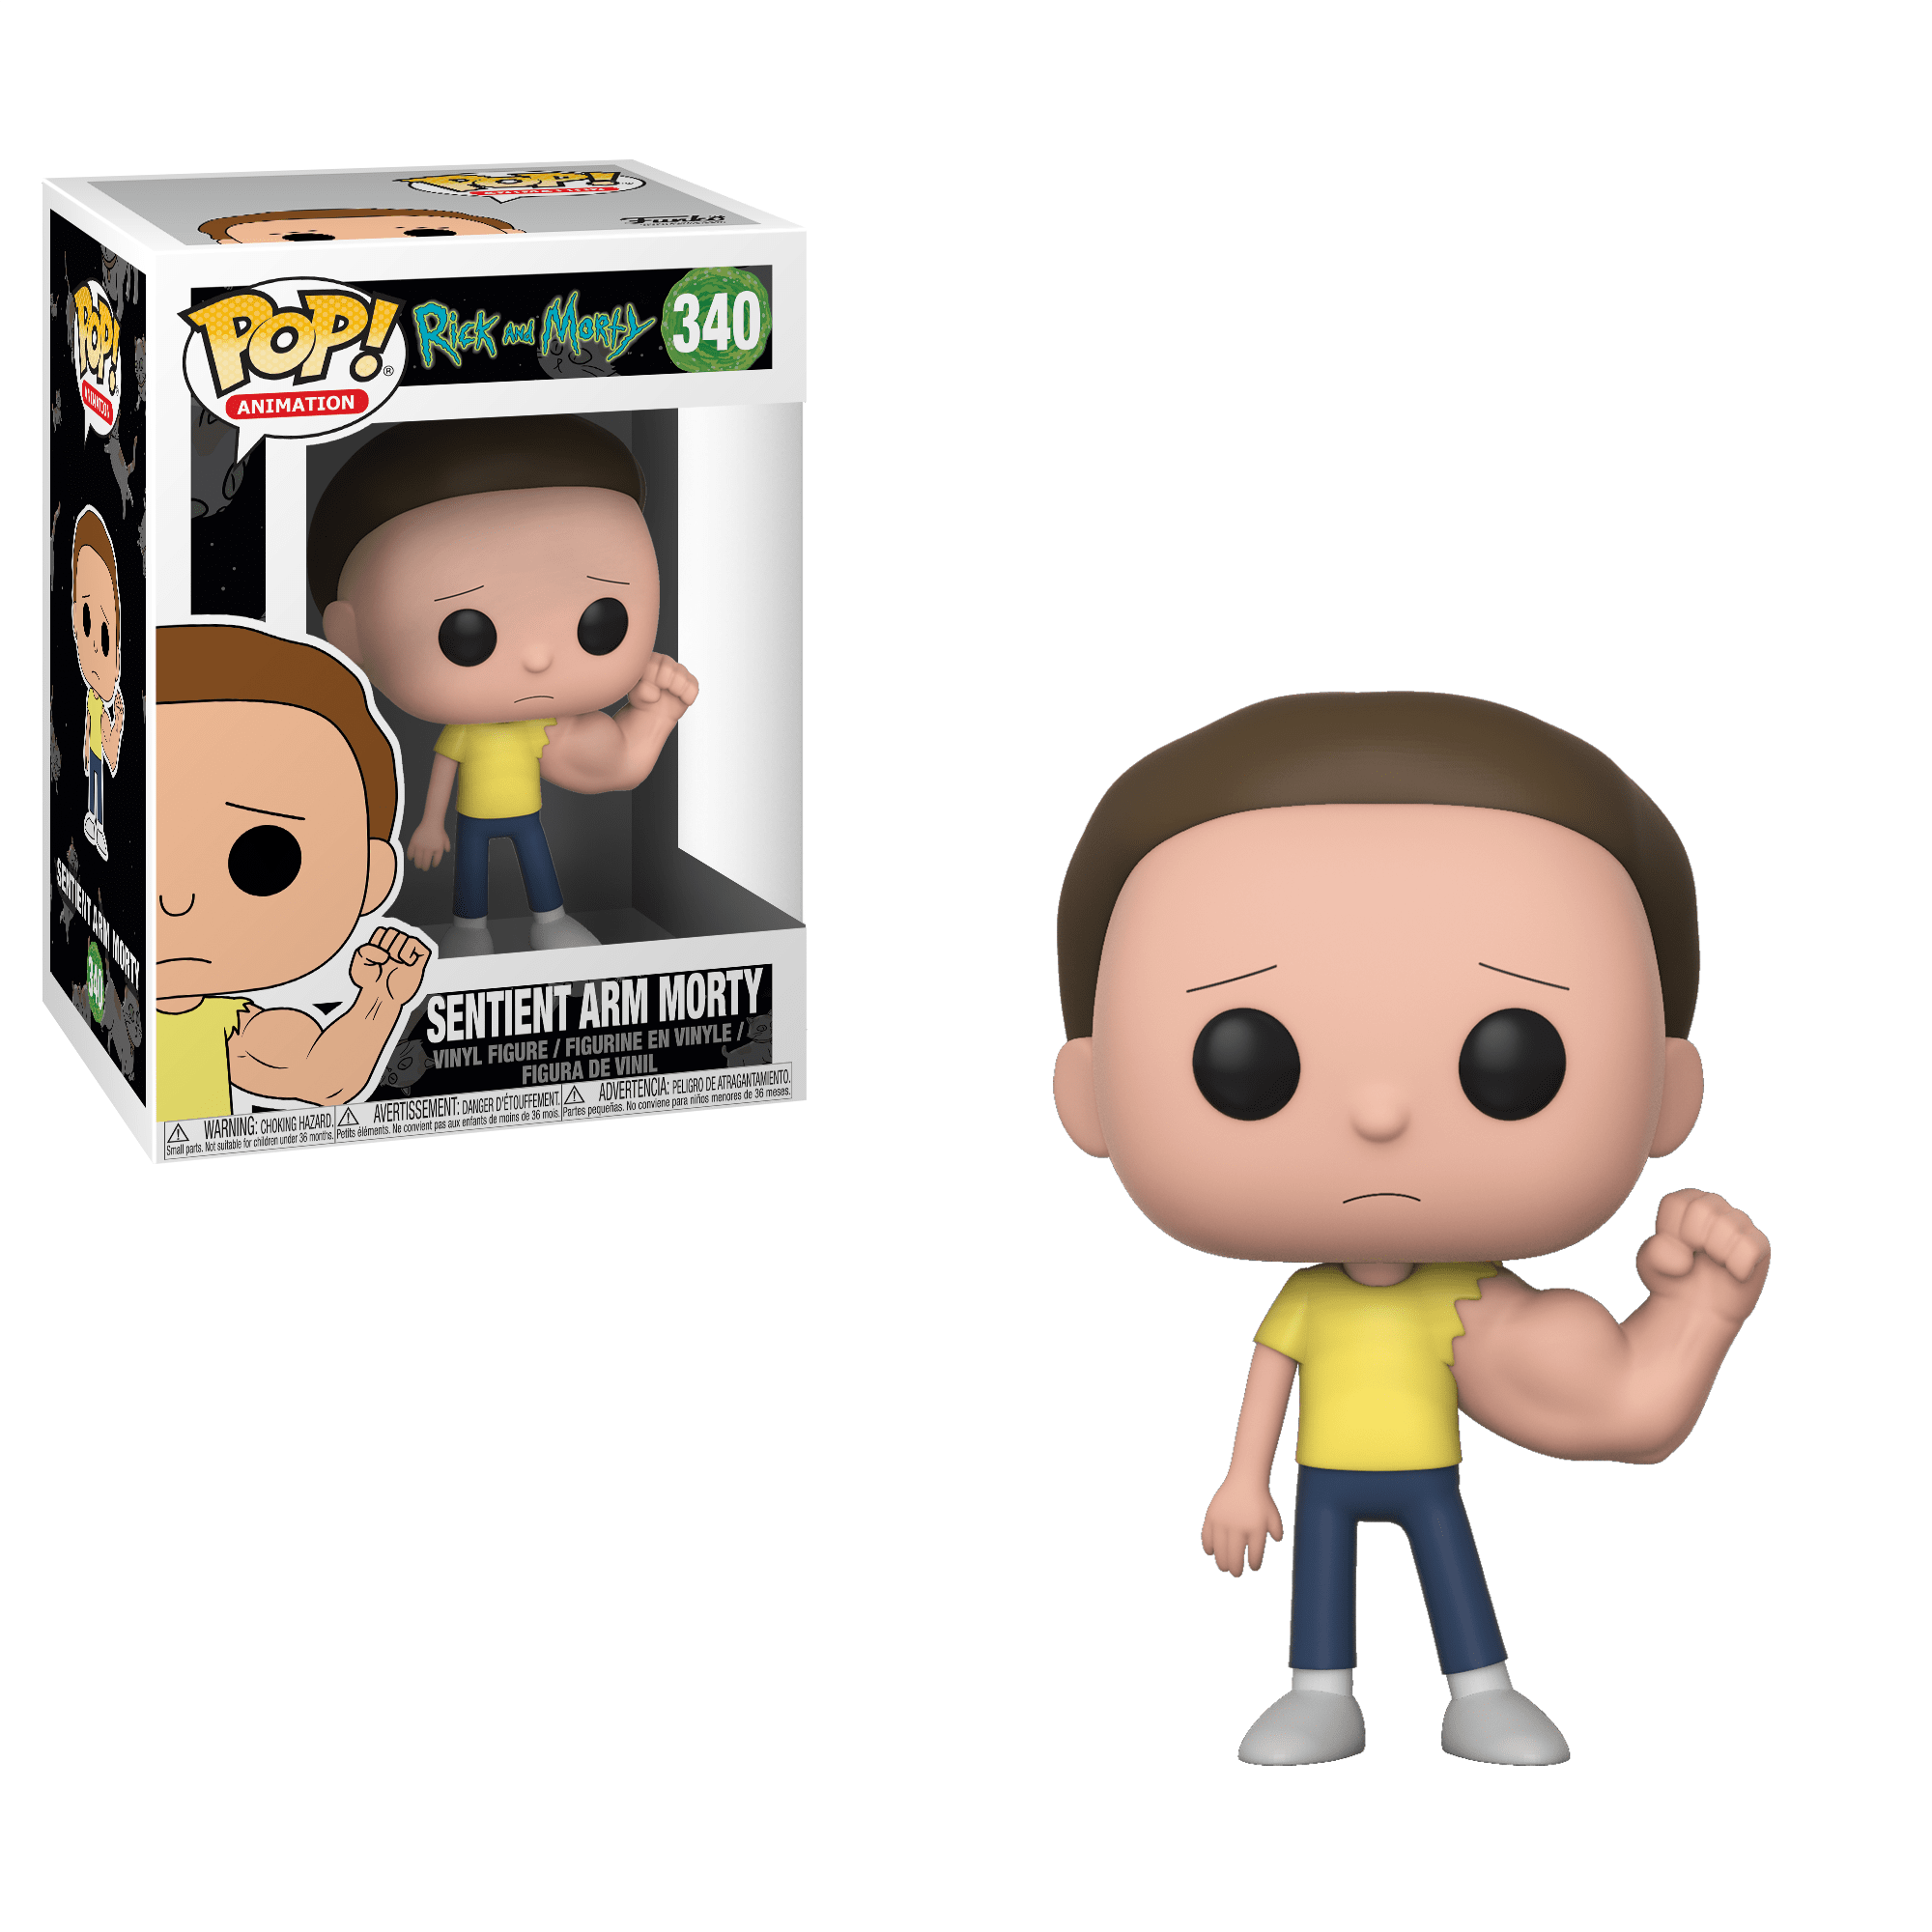 Funko Pop! Mortimer "Morty" Smith (Sentient Arm) (Rick and Morty)